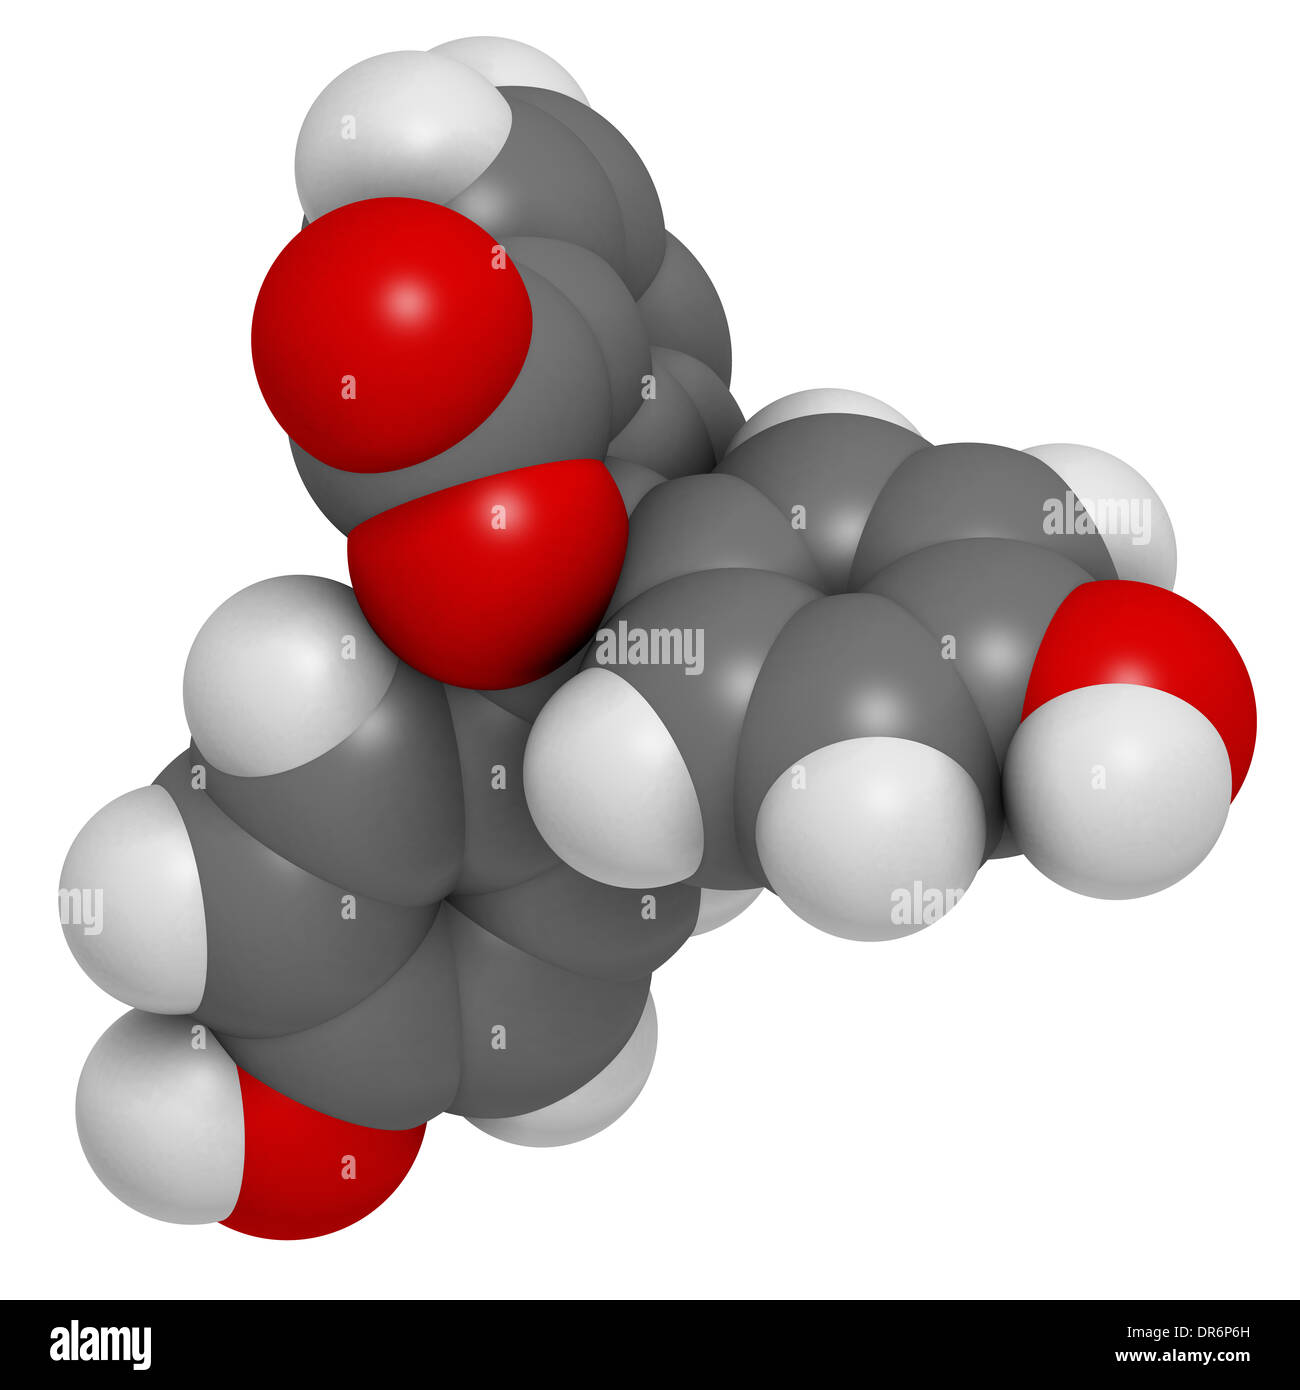 Phenolphthalein indicator molecule. Used in acid base titrations and as laxative. Stock Photo